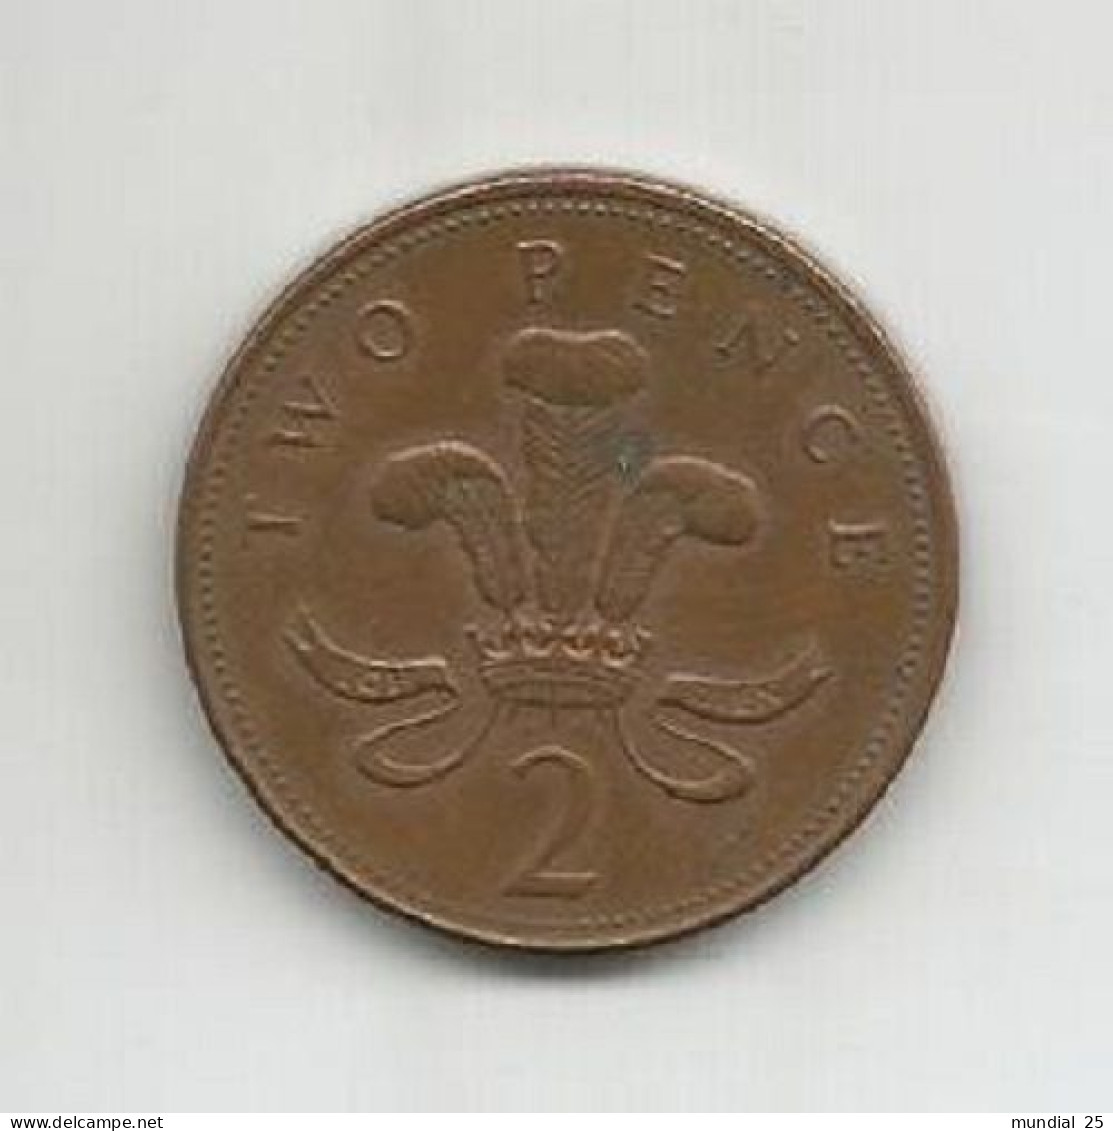 GREAT BRITAIN 2 PENCE 1997 - 2 Pence & 2 New Pence